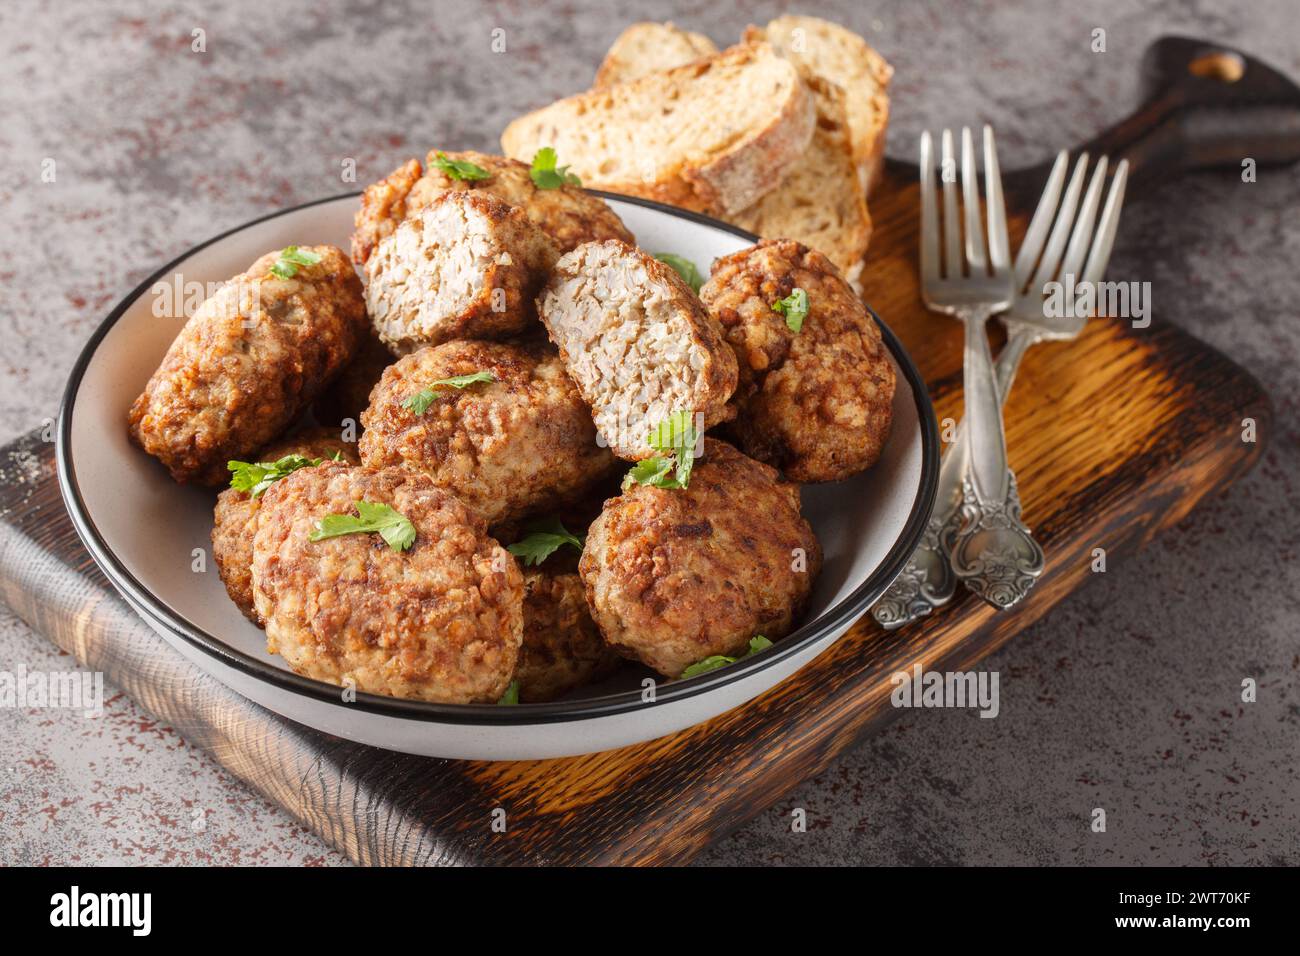 Dietary Buckwheat meatballs made of minced beef and boiled buckwheat porridge with onions, spices close-up in a plate on the table. Horizontal Stock Photo